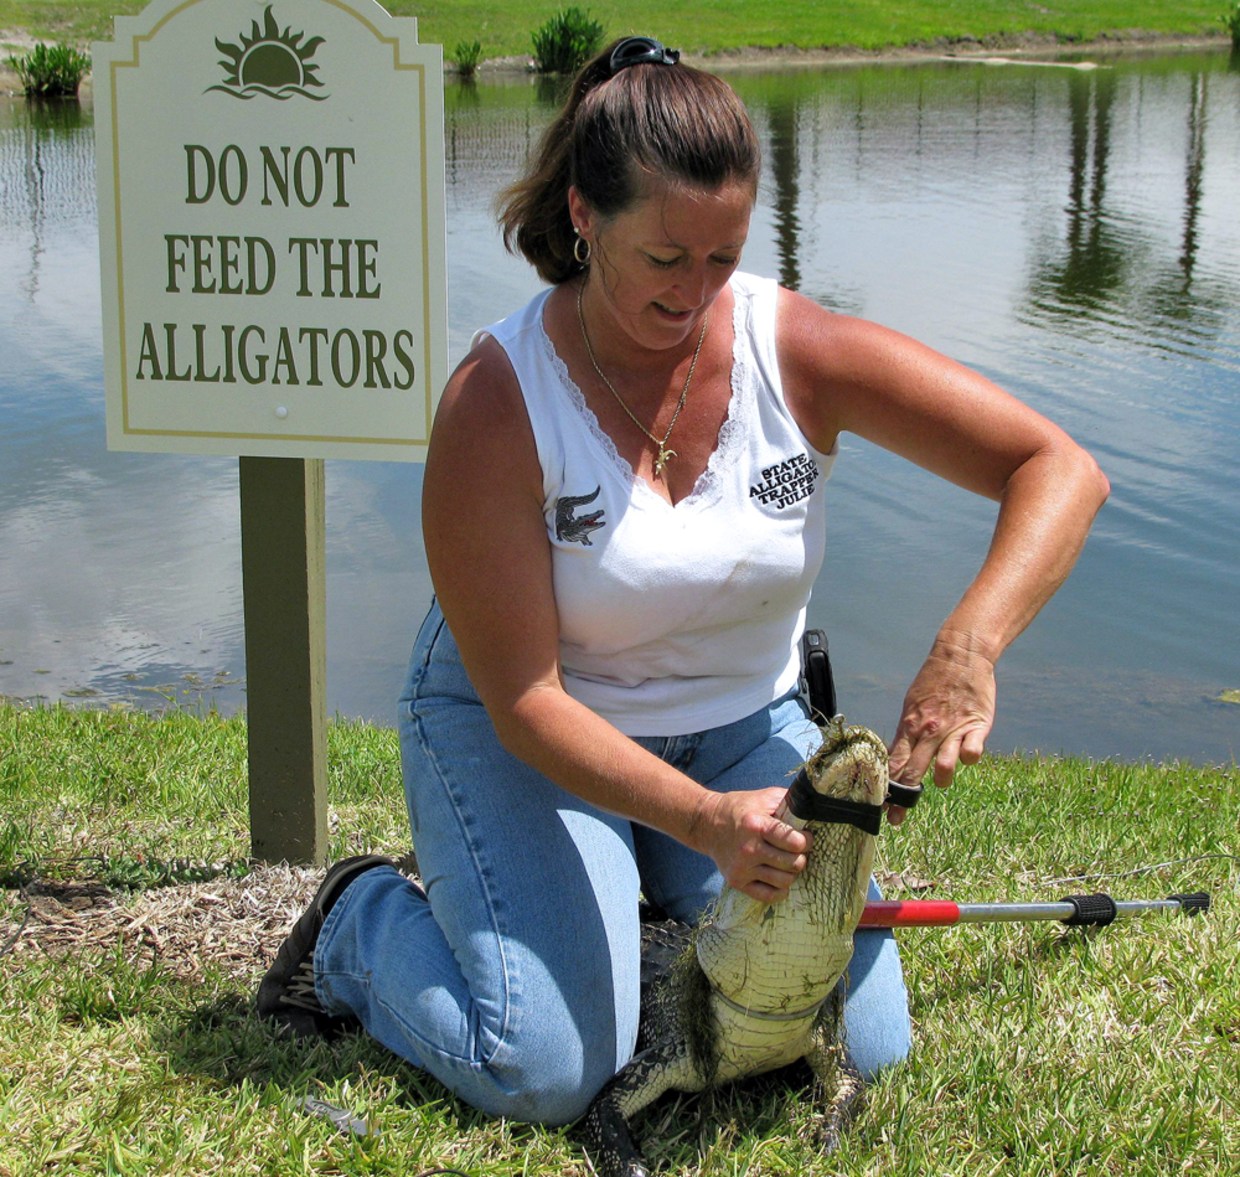 Got what it takes? Apply to be an alligator trapper